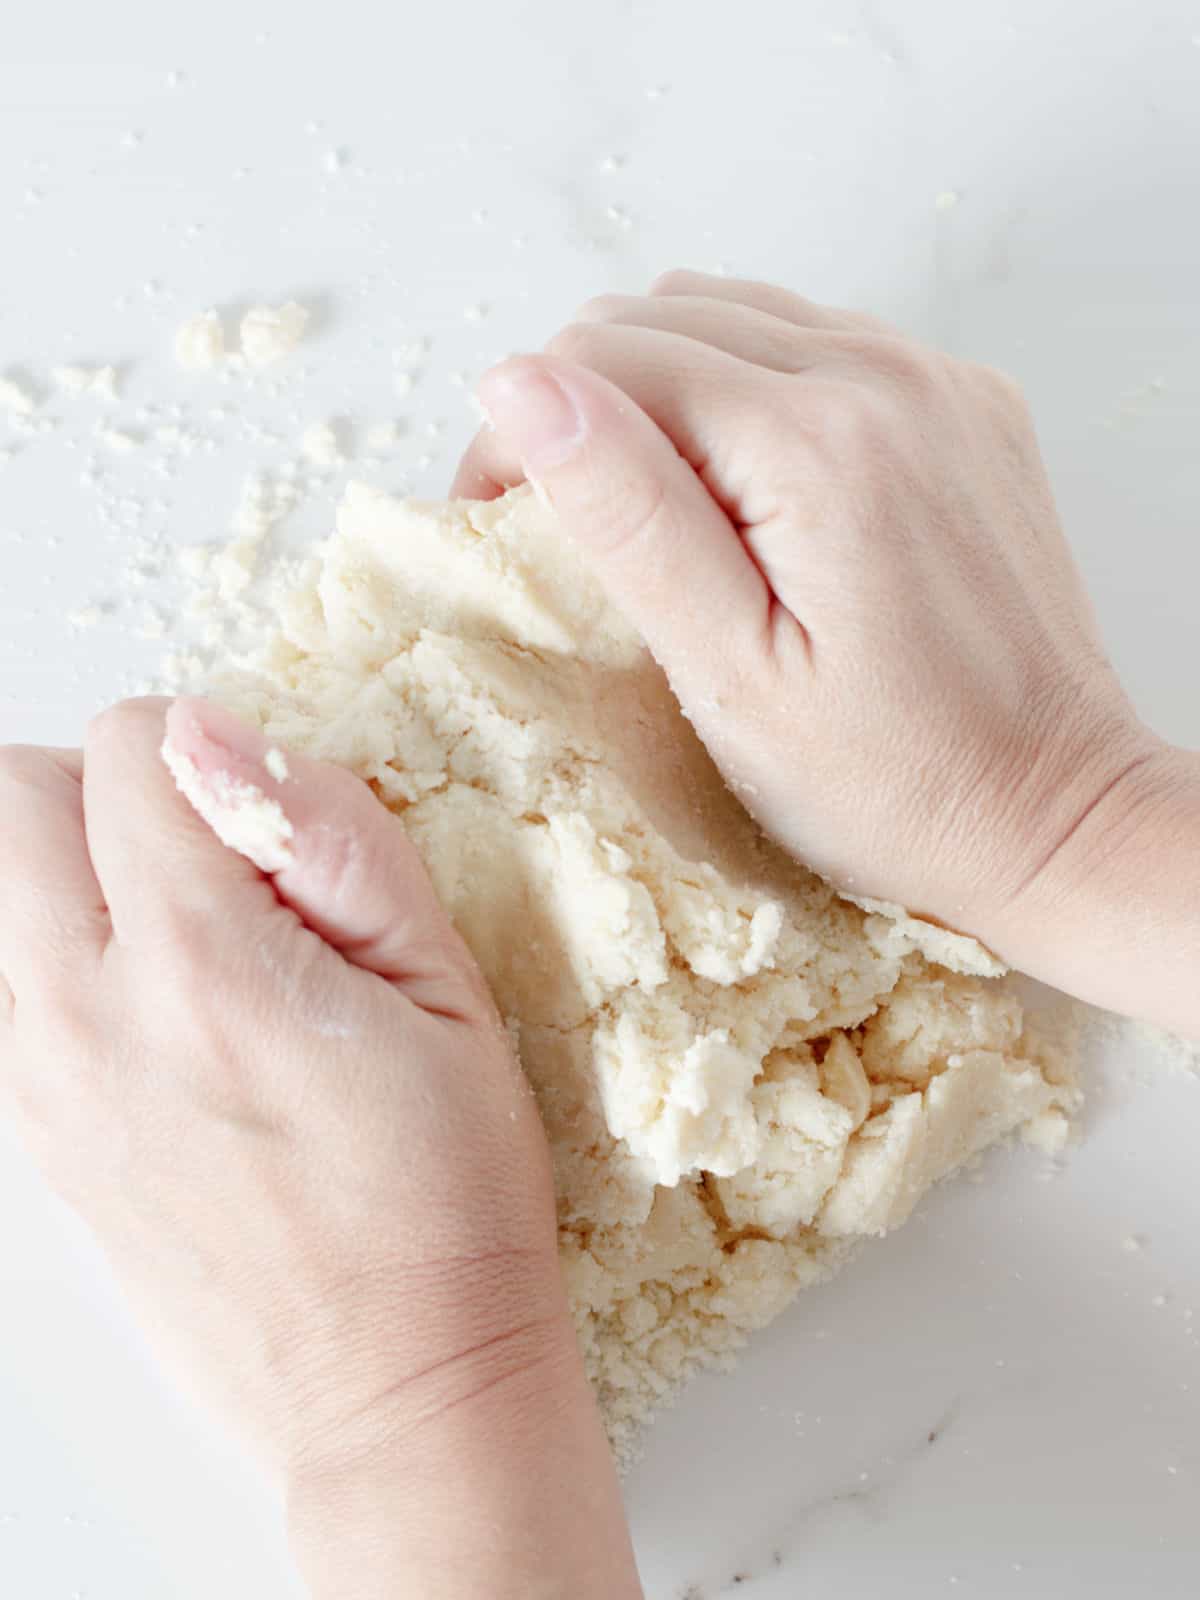 Pair of hands working a pie crust dough on a white marble surface.